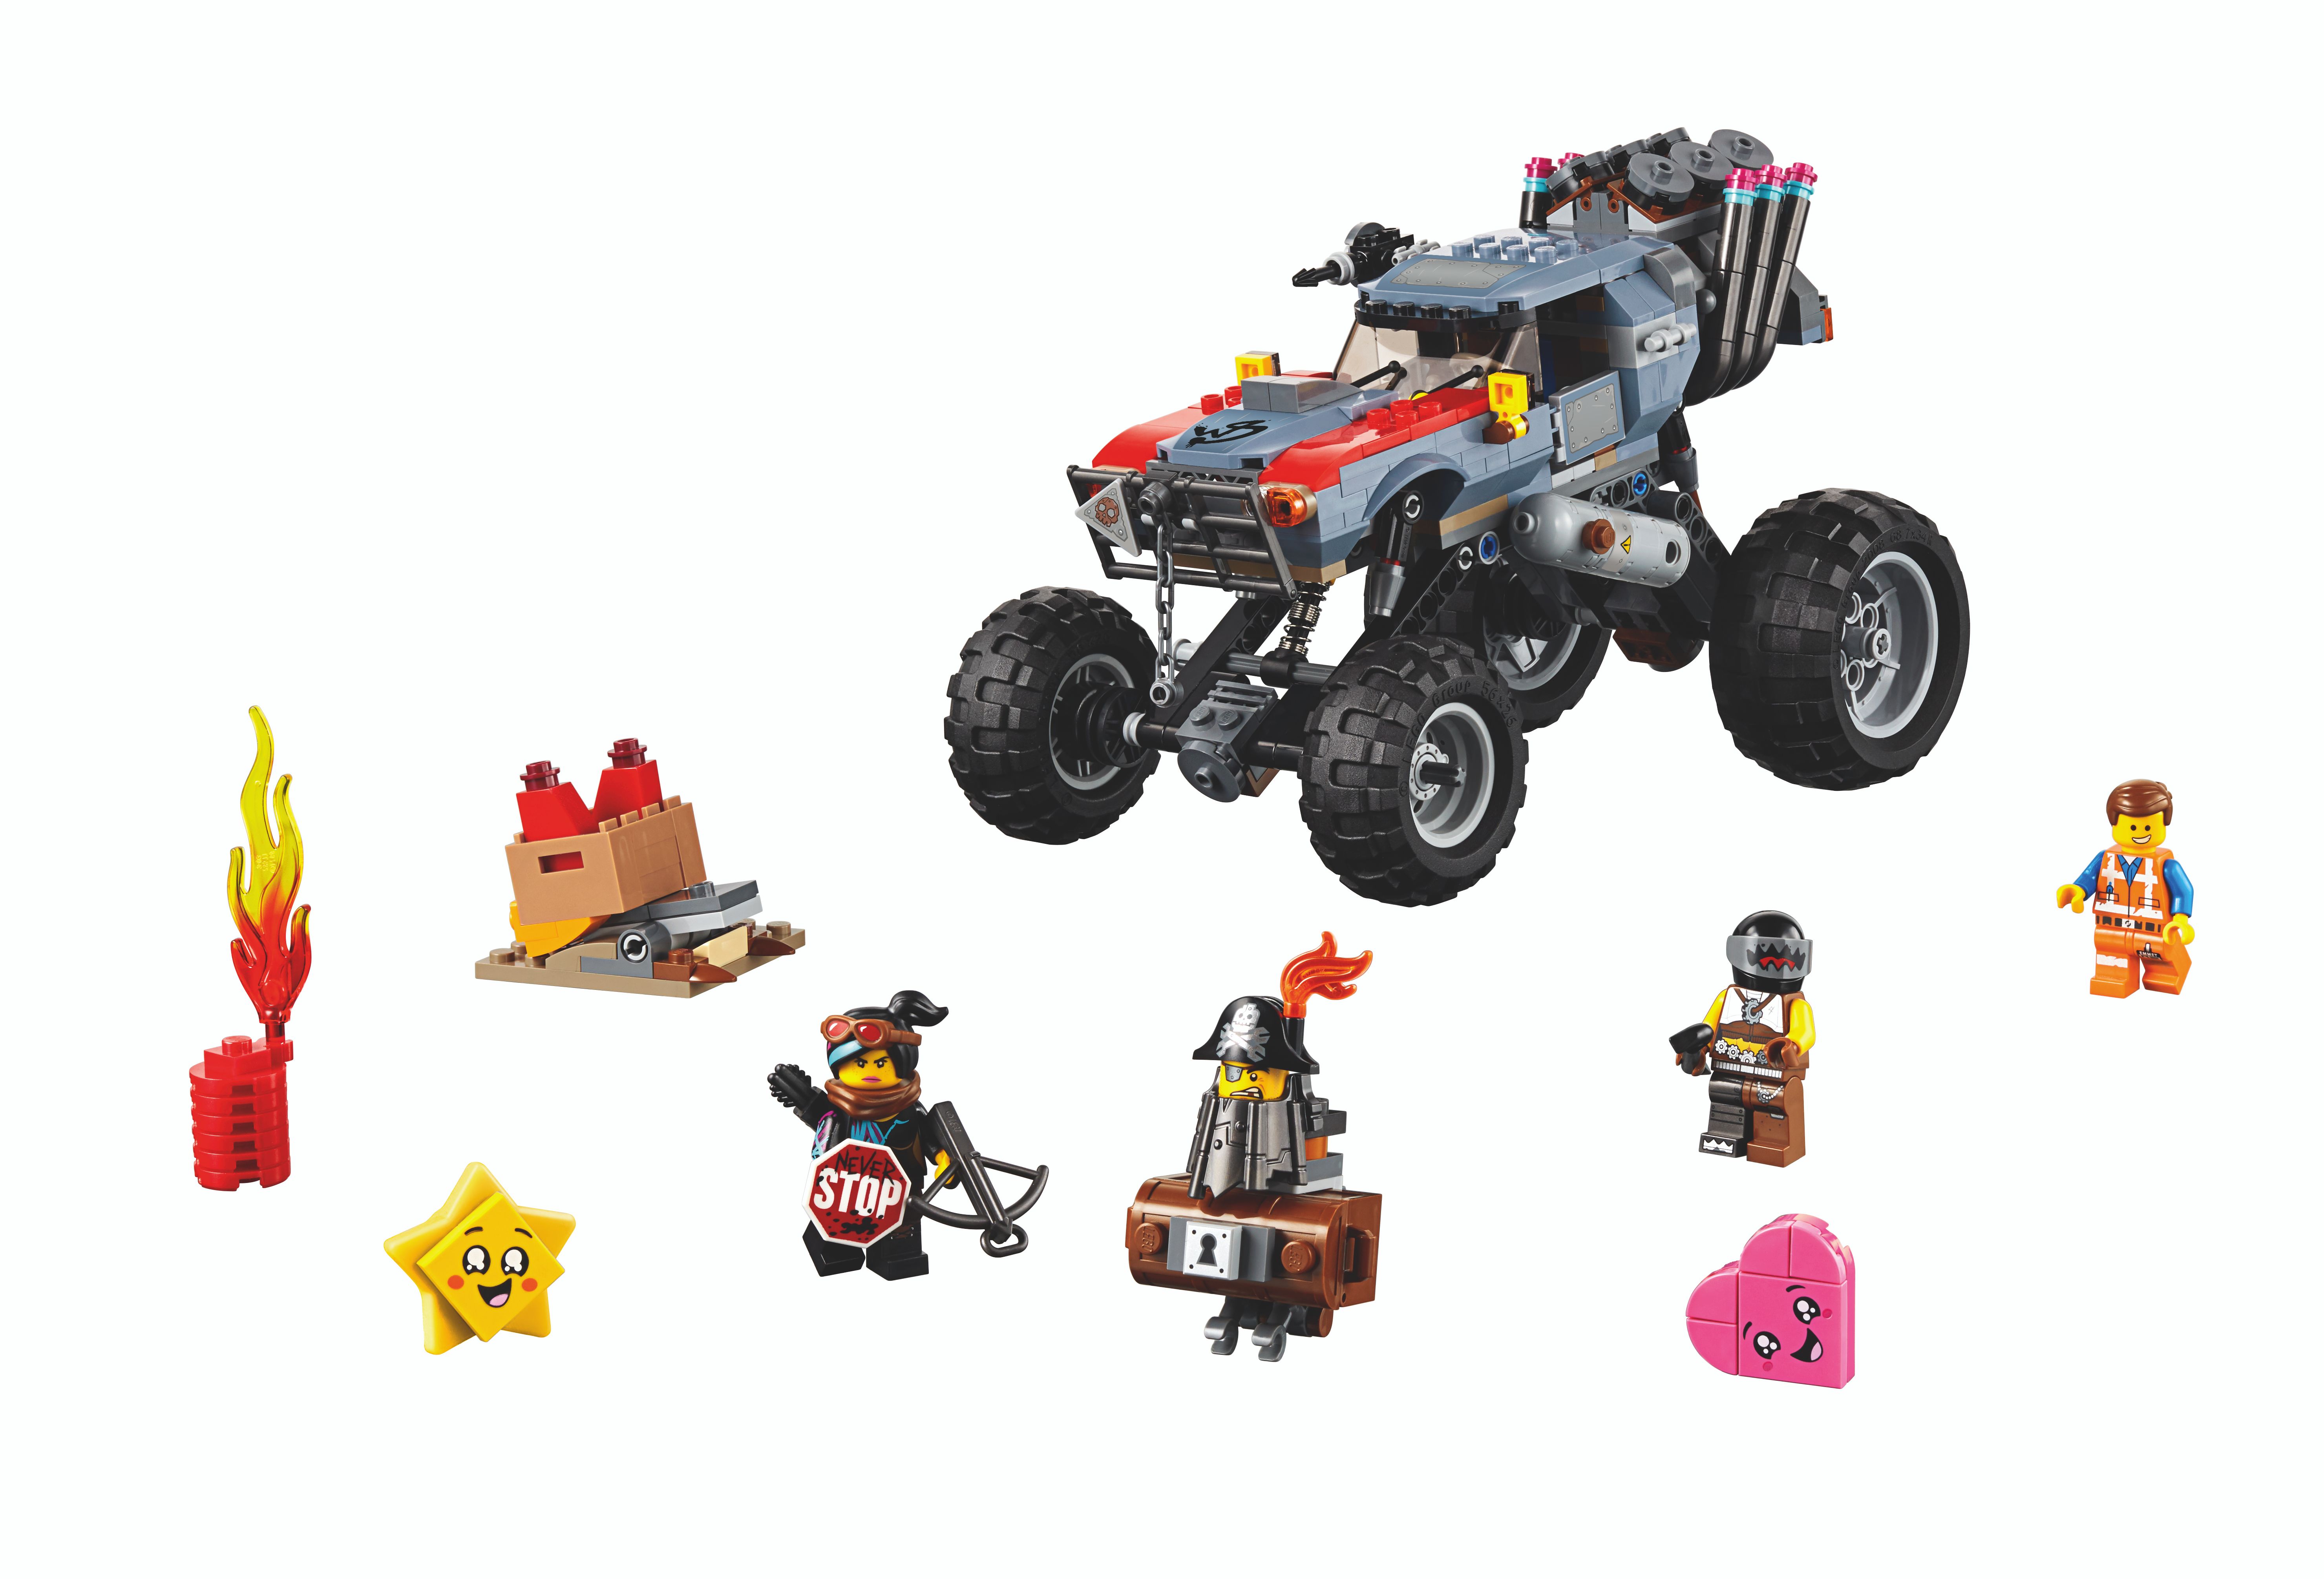 21 Lego sets from The Lego Movie 2 The Second Part - every set covered image 8